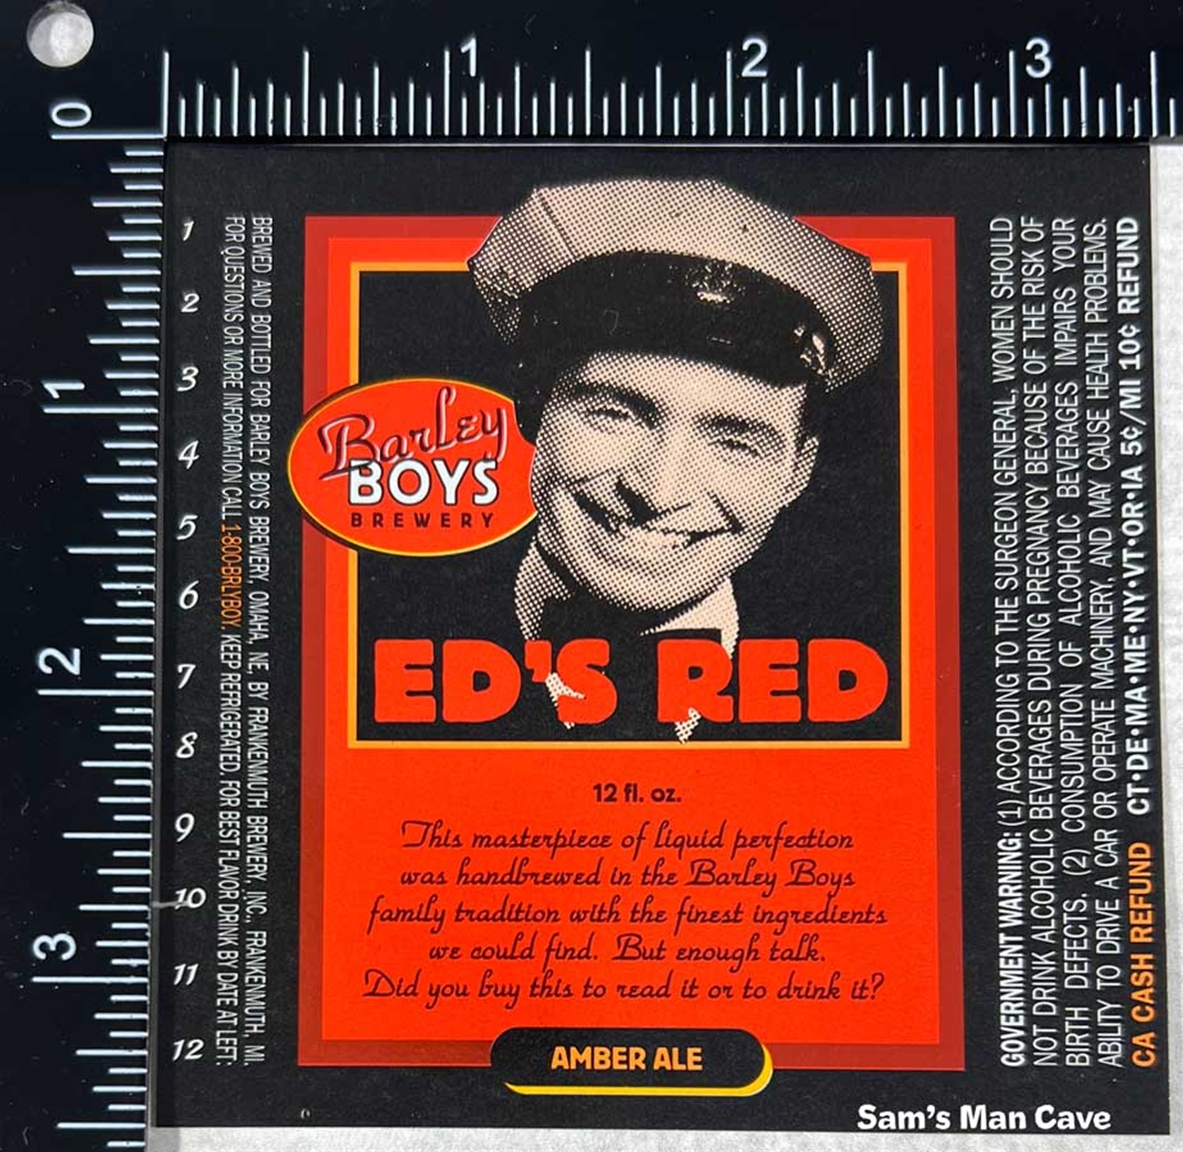 Barley Boys Ed's Red Amber Ale Label